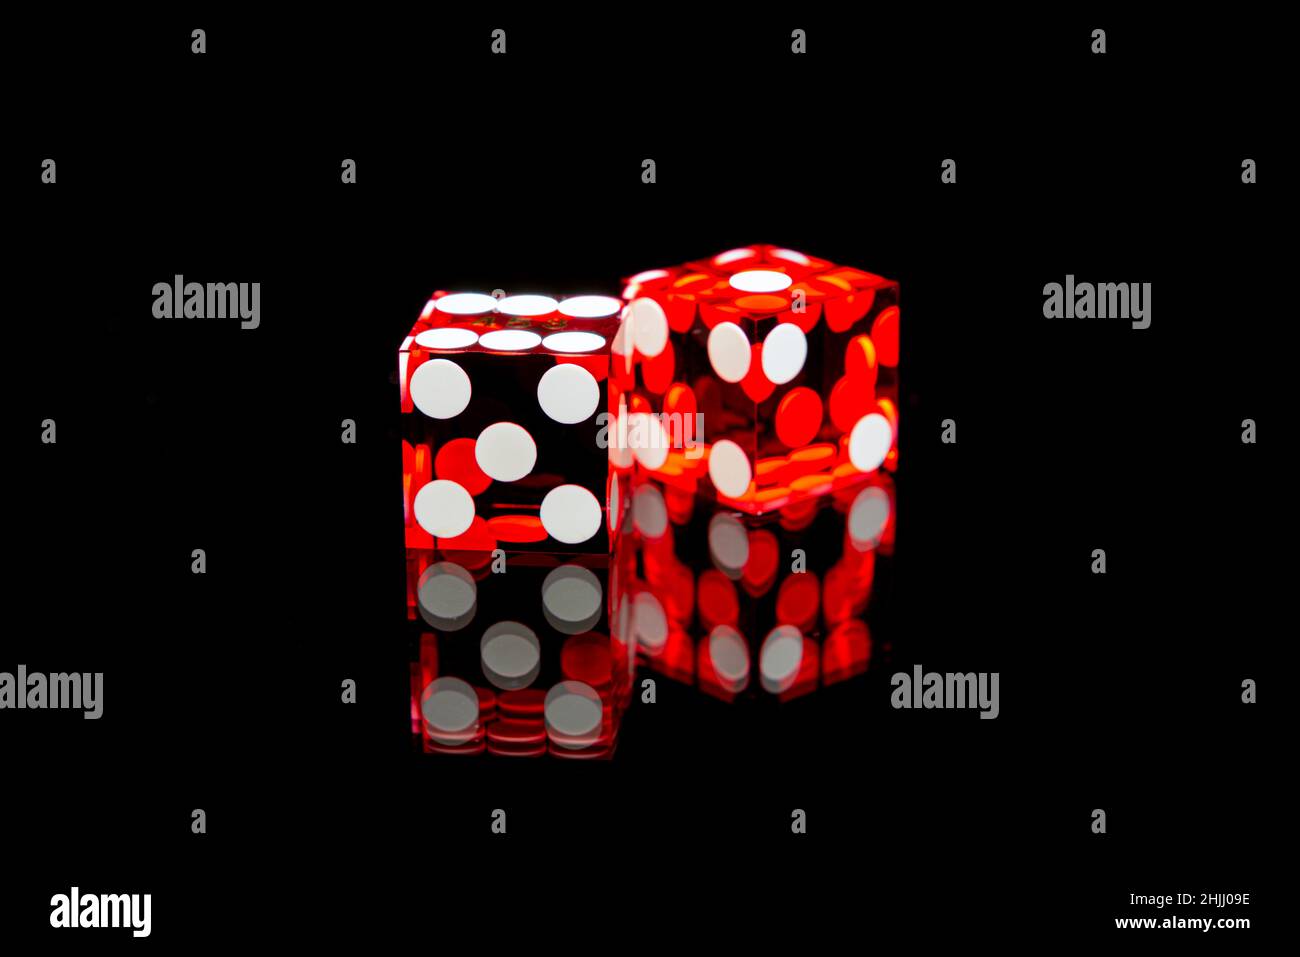 Professional casino-style dice on a reflective surface isolated against a black background. Stock Photo